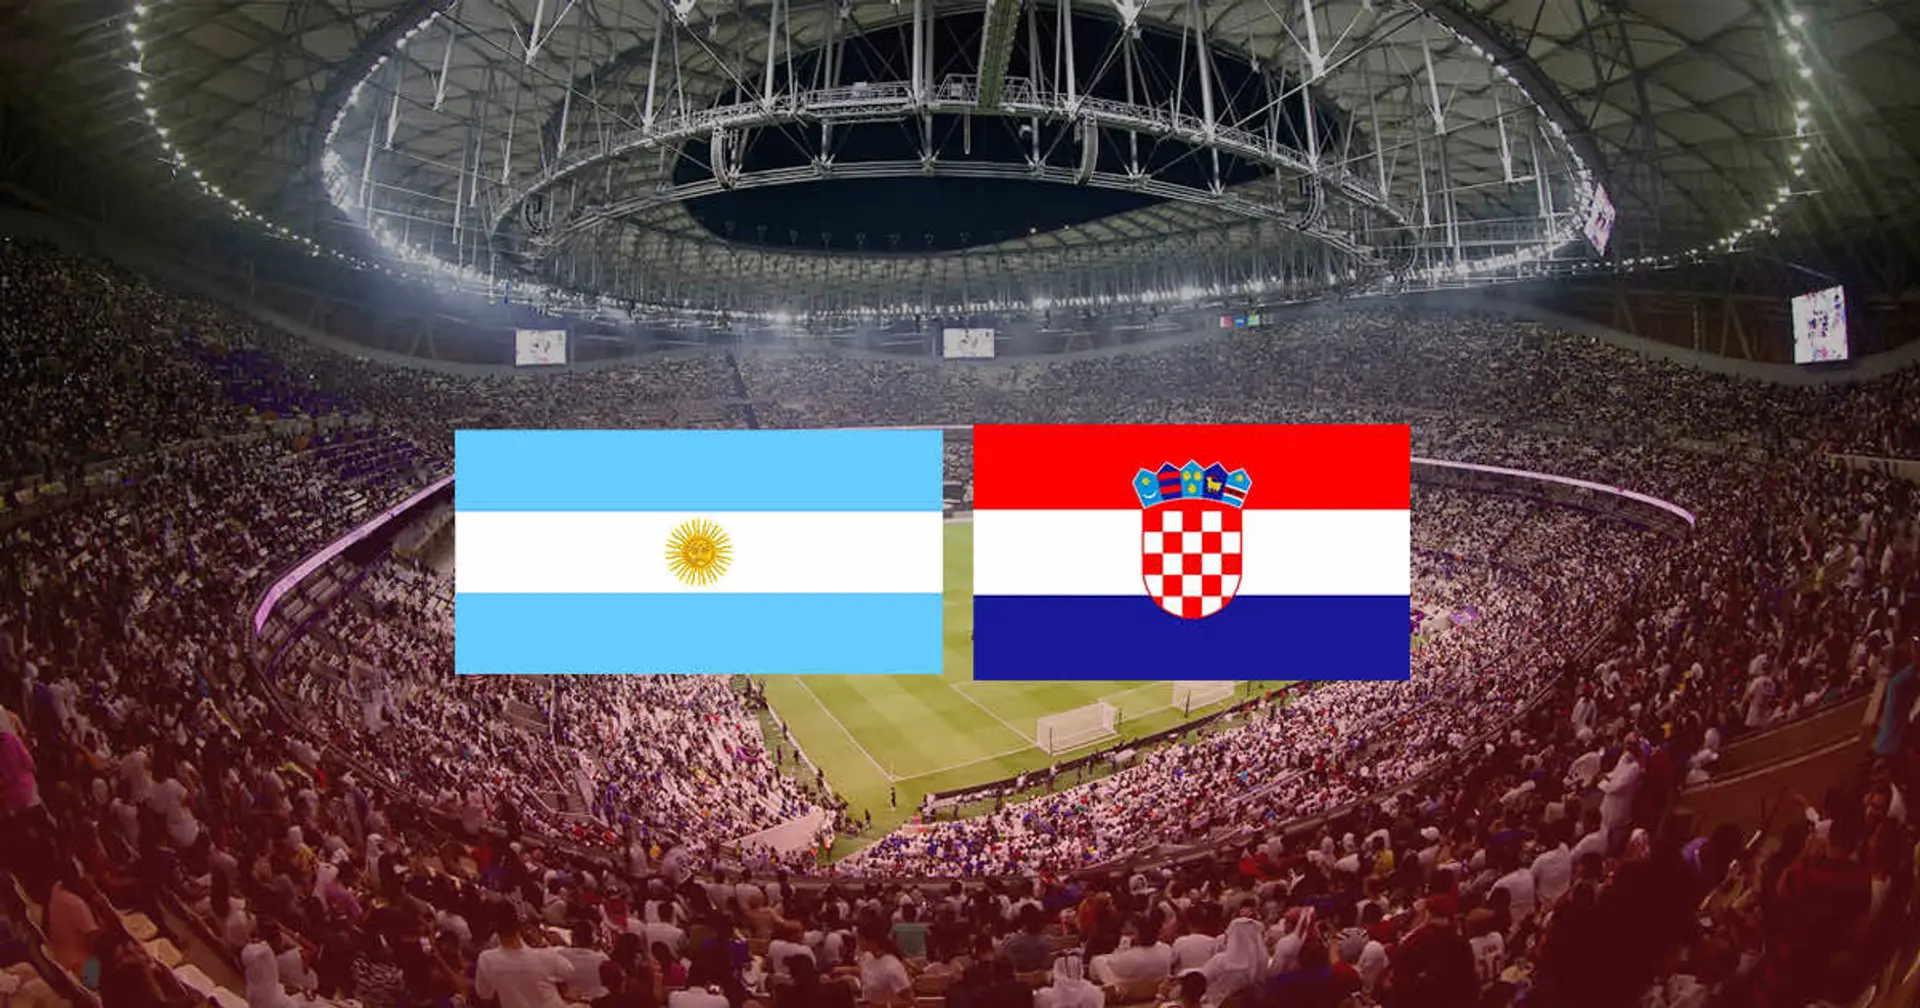 Argentina vs Croatia: Official team lineups for the World Cup clash revealed